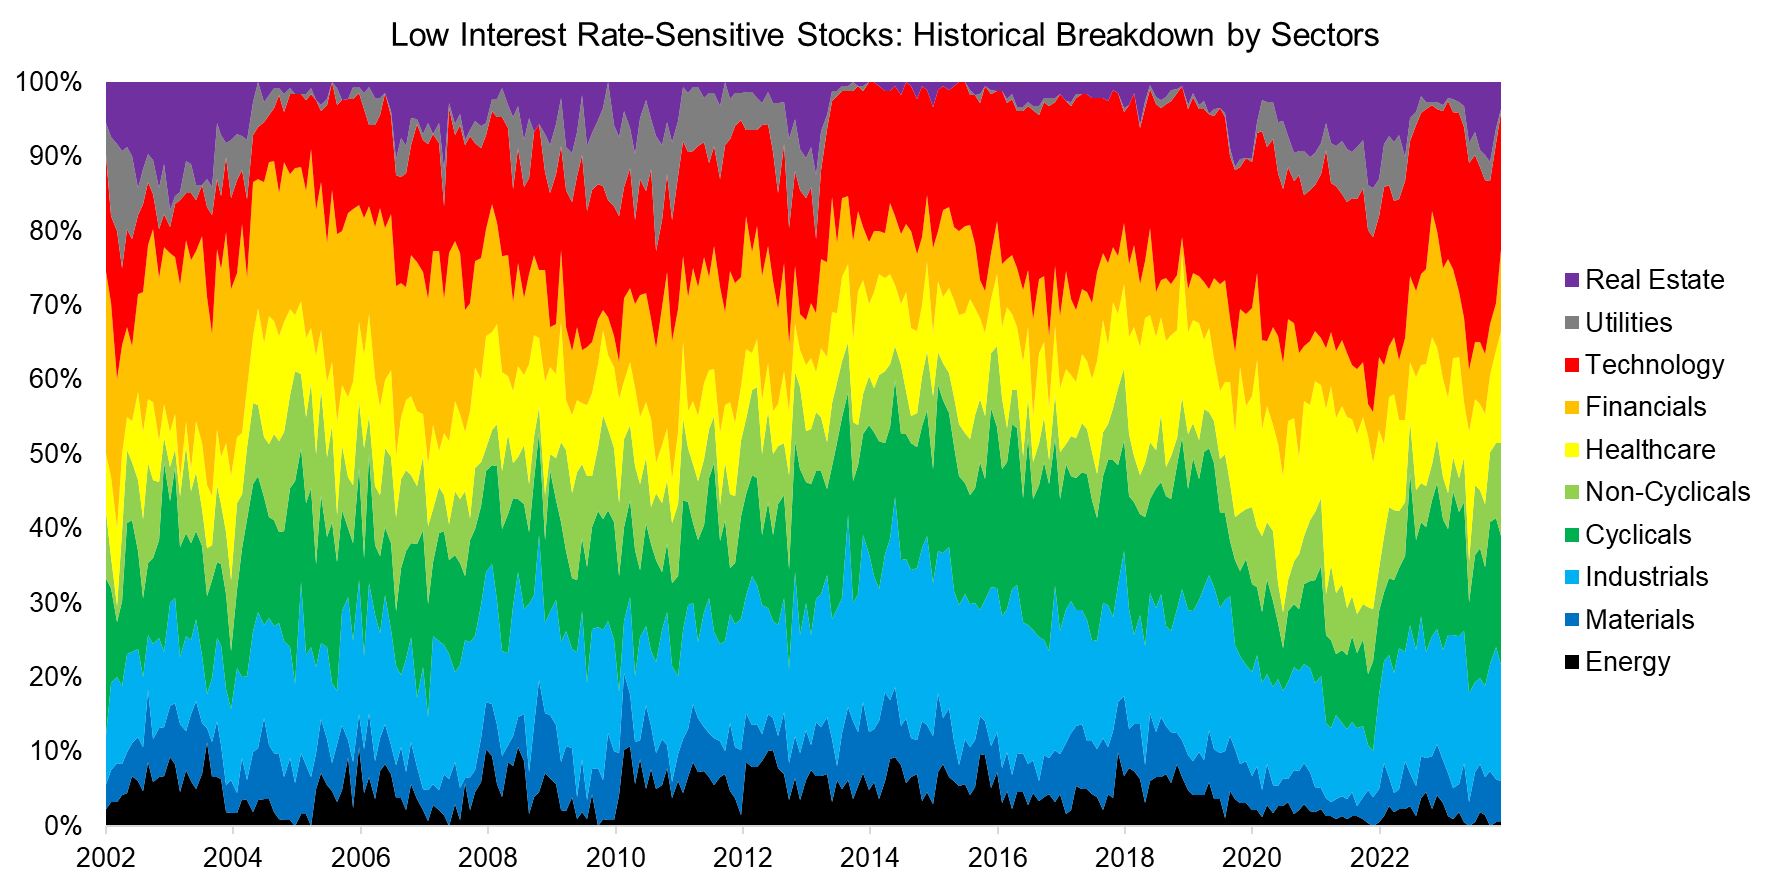 Low Interest Rate-Sensitive Stocks Historical Breakdown by Sectors